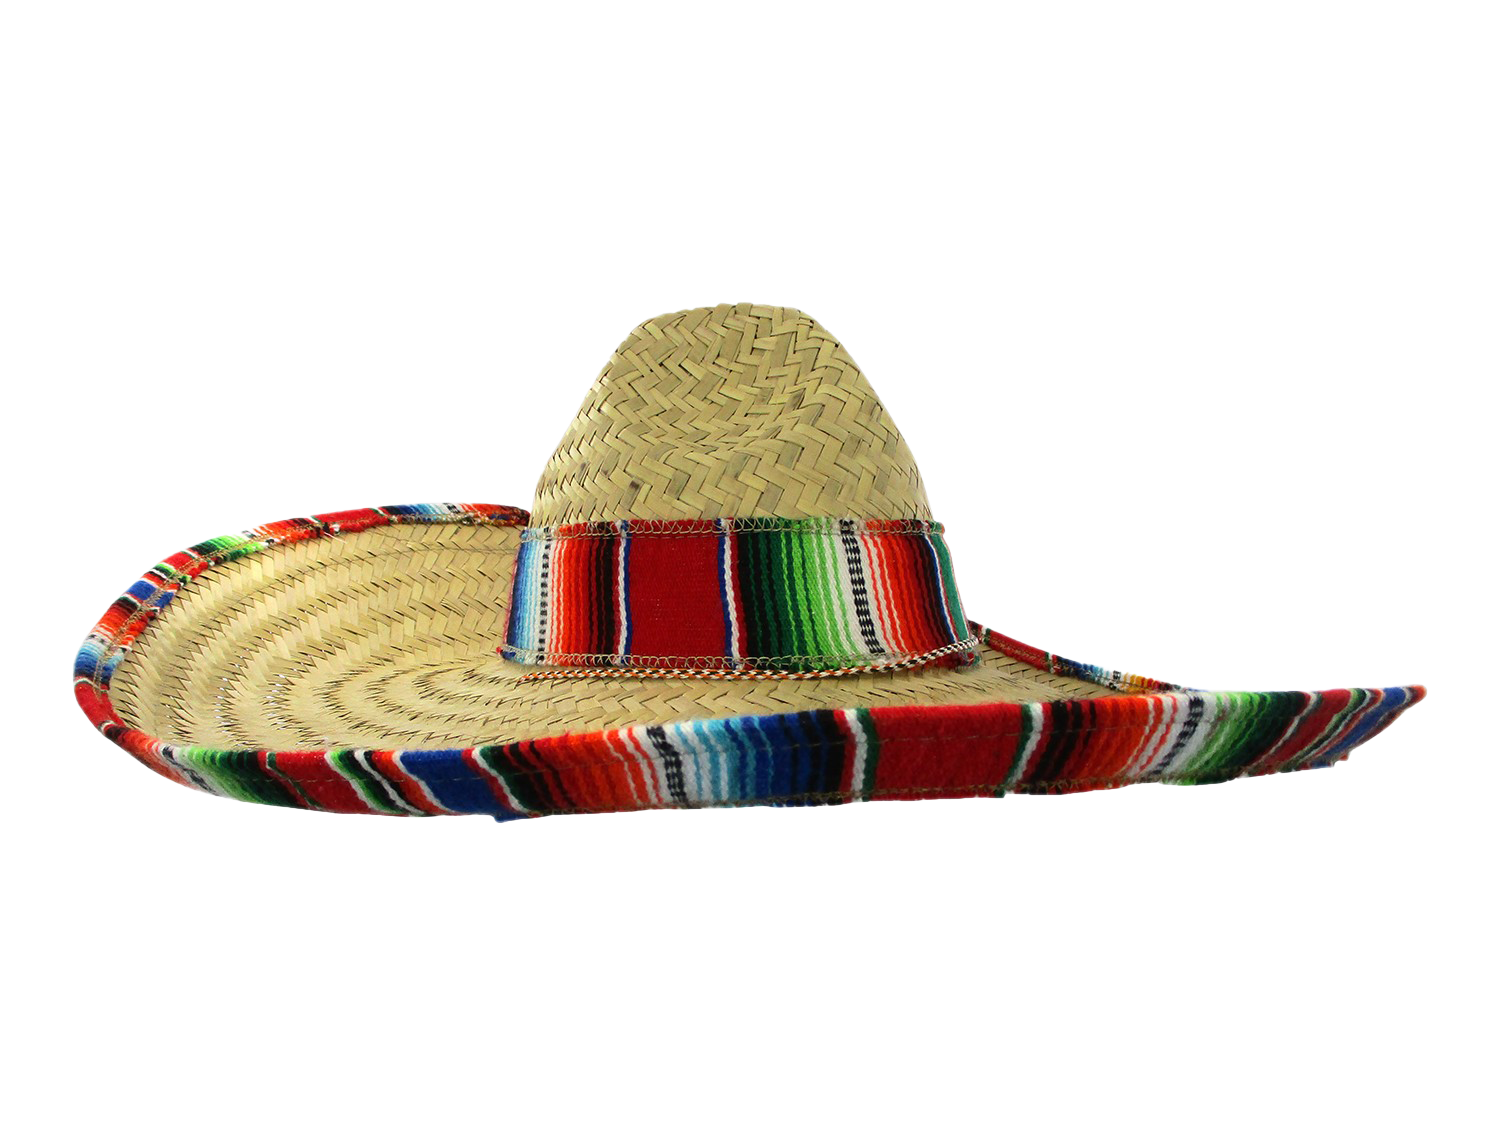 Sombrero PNG Images Transparent Background | PNG Play